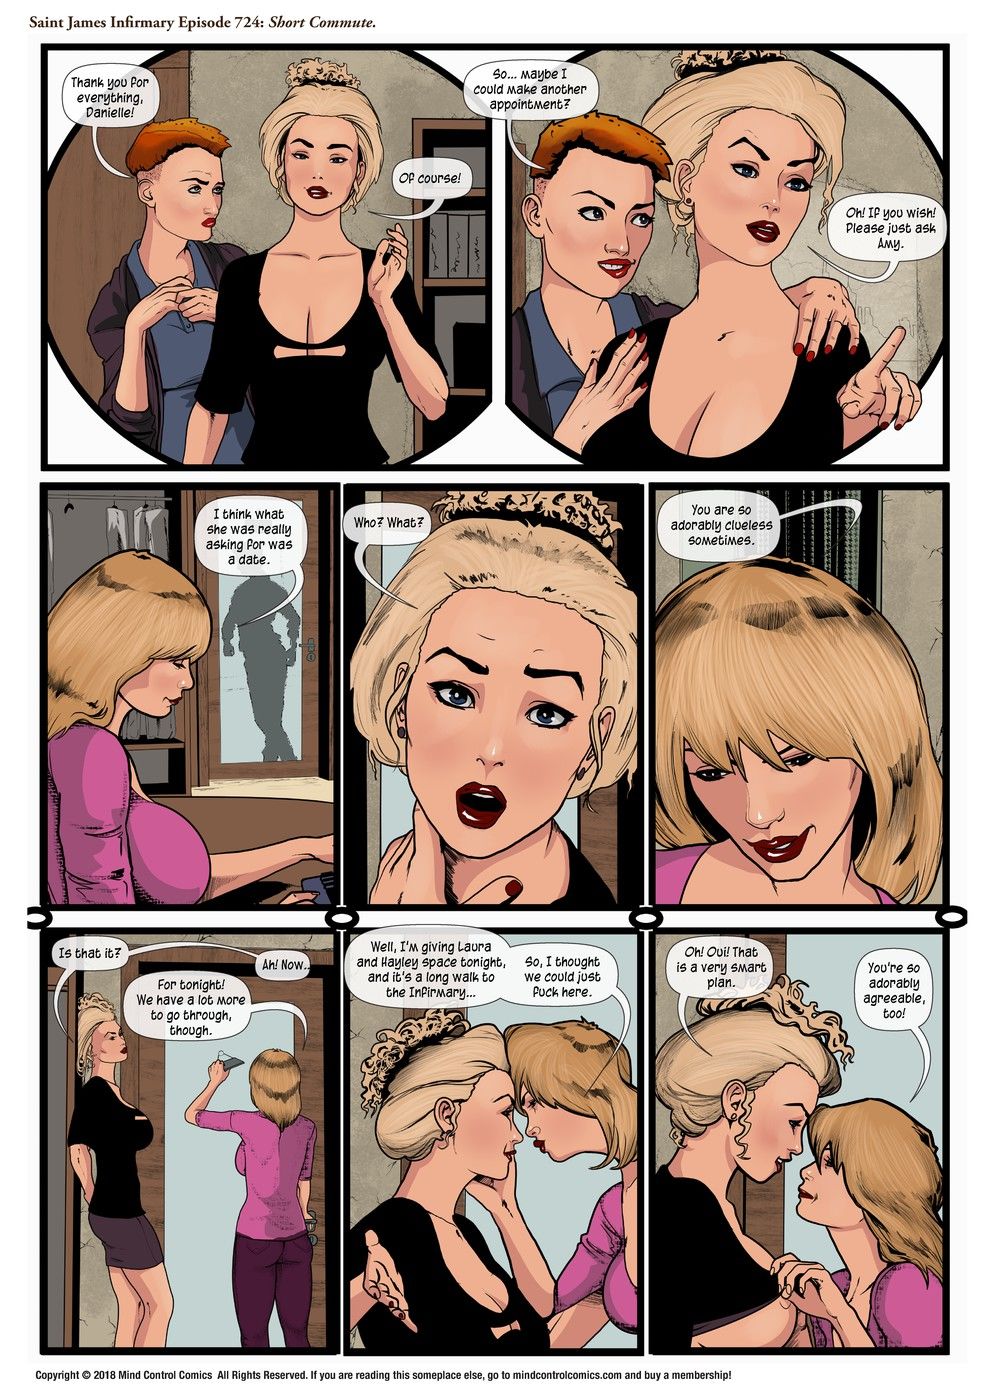 Saint James Infirmary Episode 701 page 24